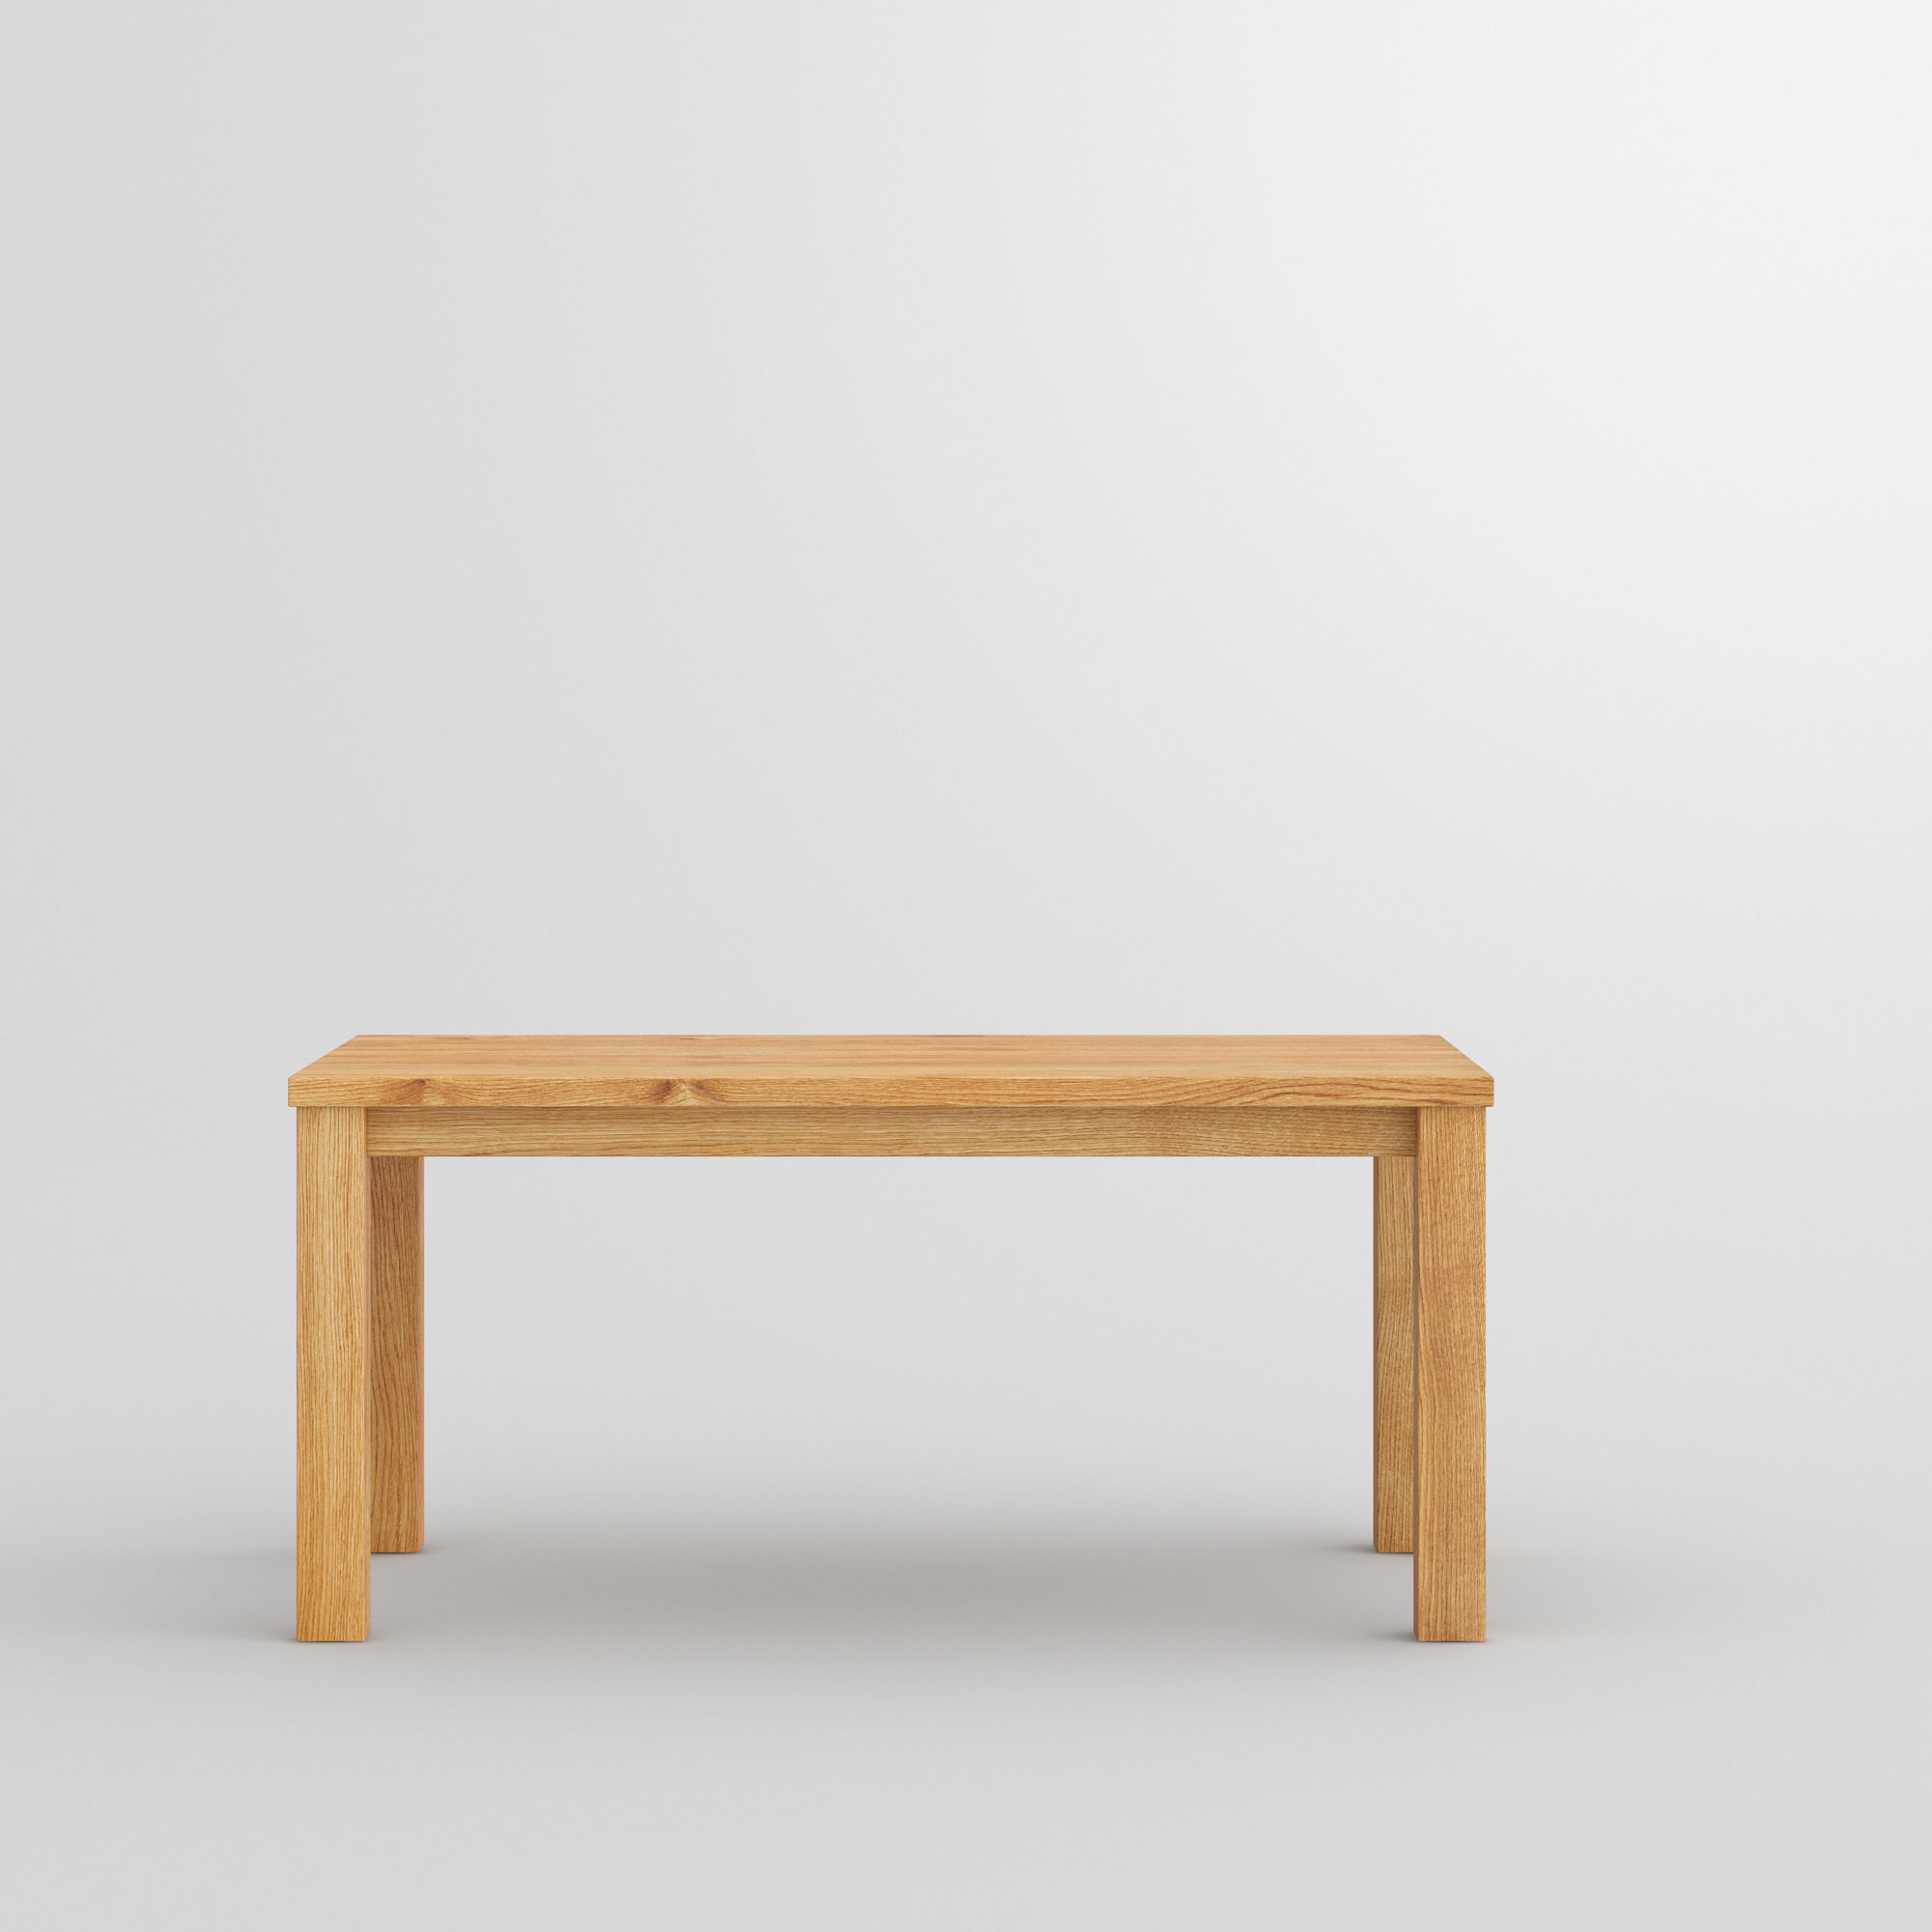 Tailor-Made Solid Wood Table FORTE 4 B9X9 cam2 custom made in solid wood by vitamin design